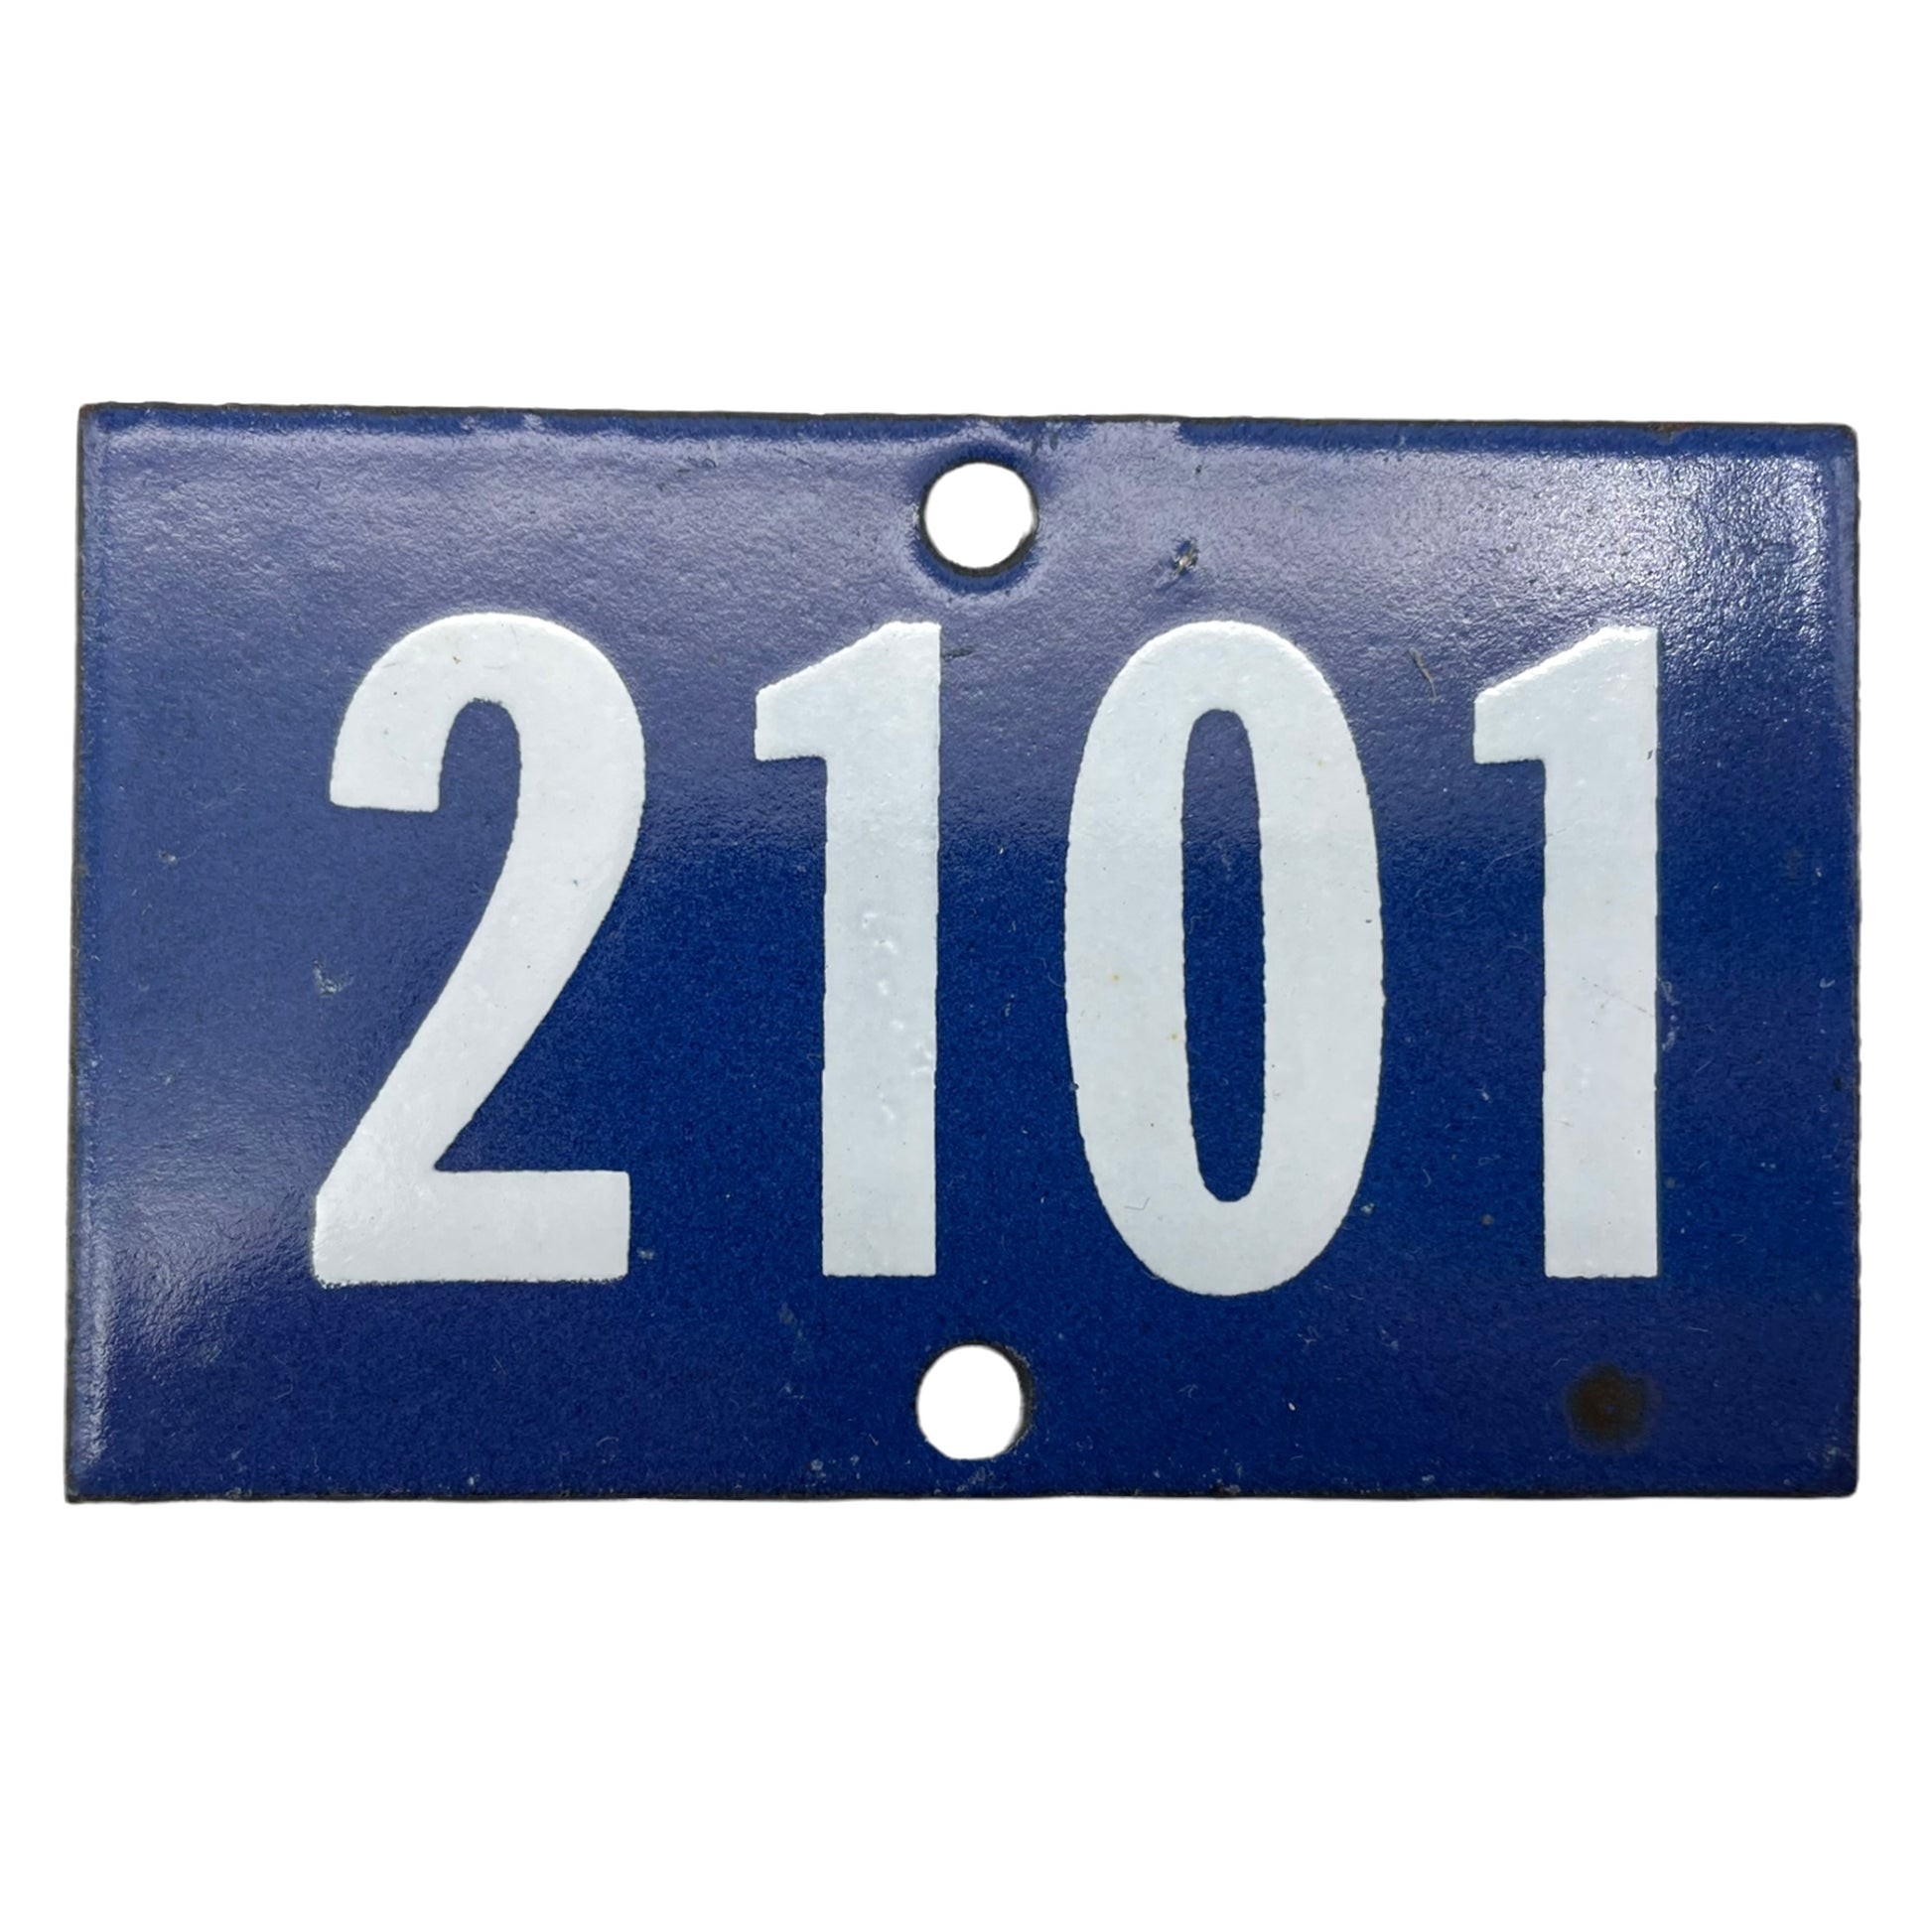 image of vintage French enamel door or house number 2101 sold by allthingsfrenchstore.com